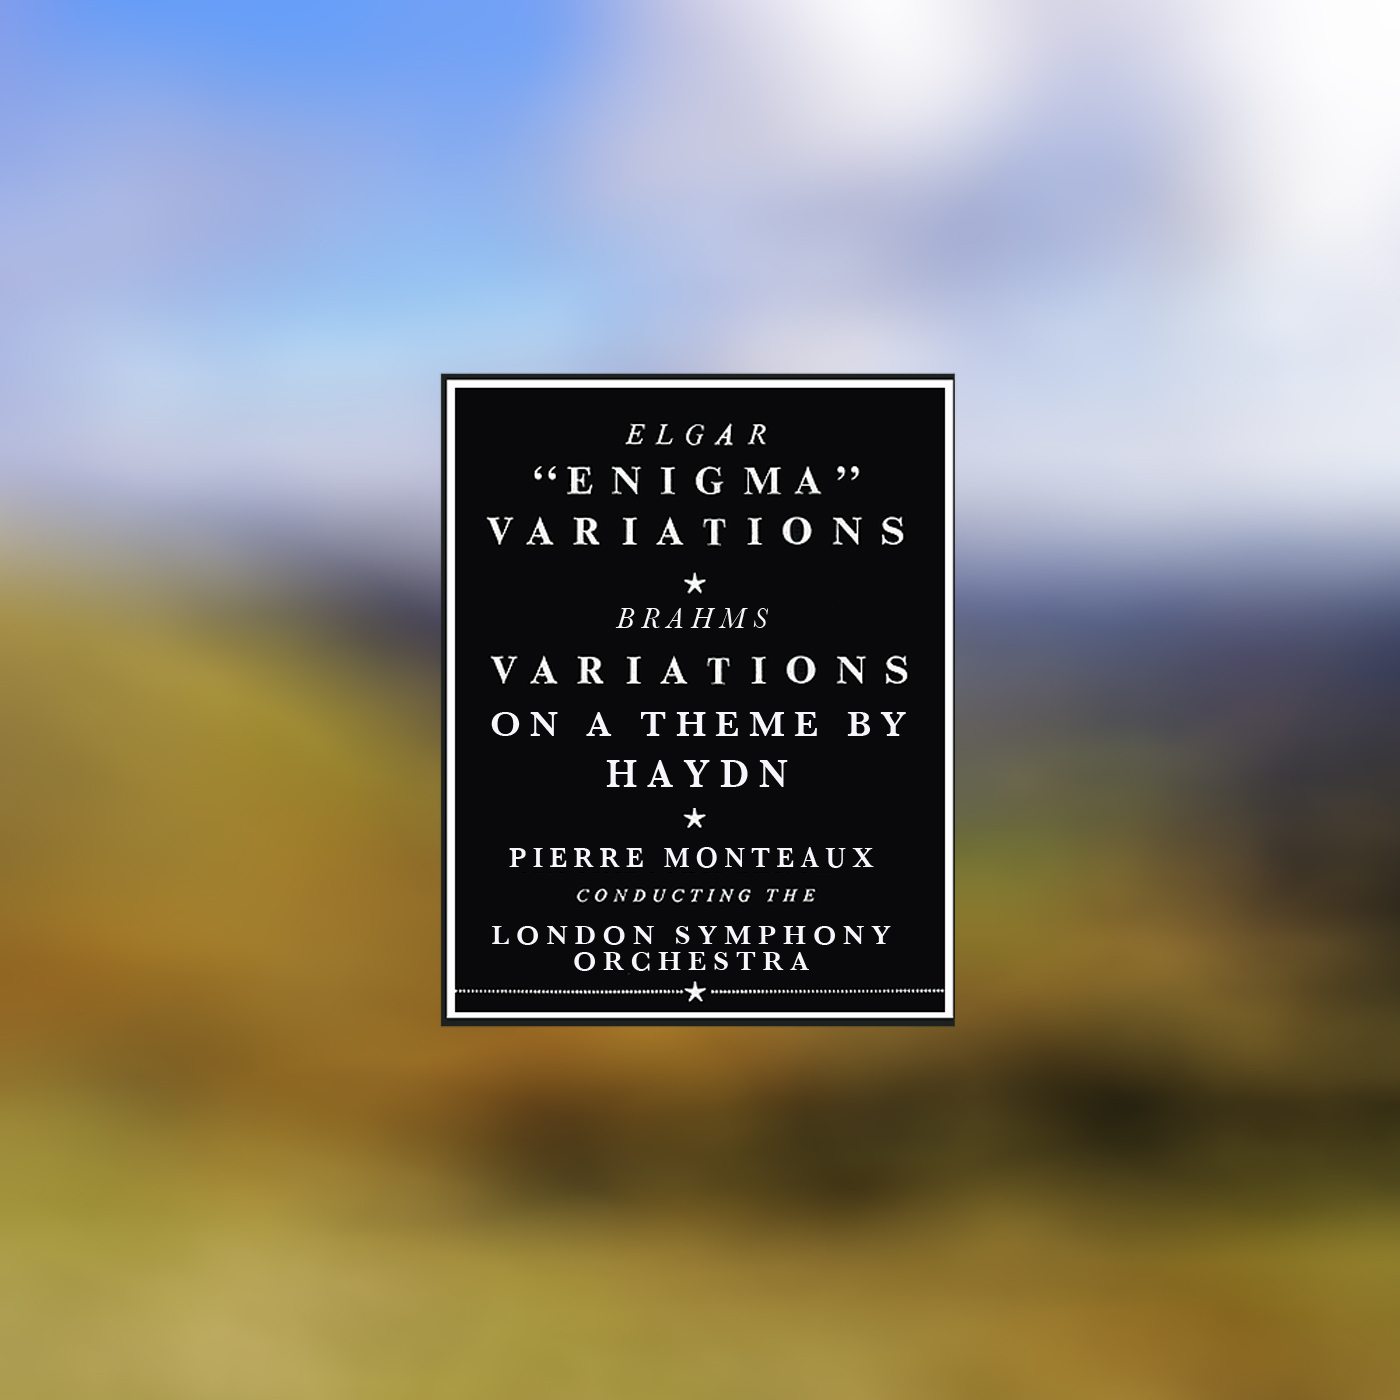 Variations On an Original Theme, Op. 36  "Enigma": XI. G.R.S -Allegro di molto